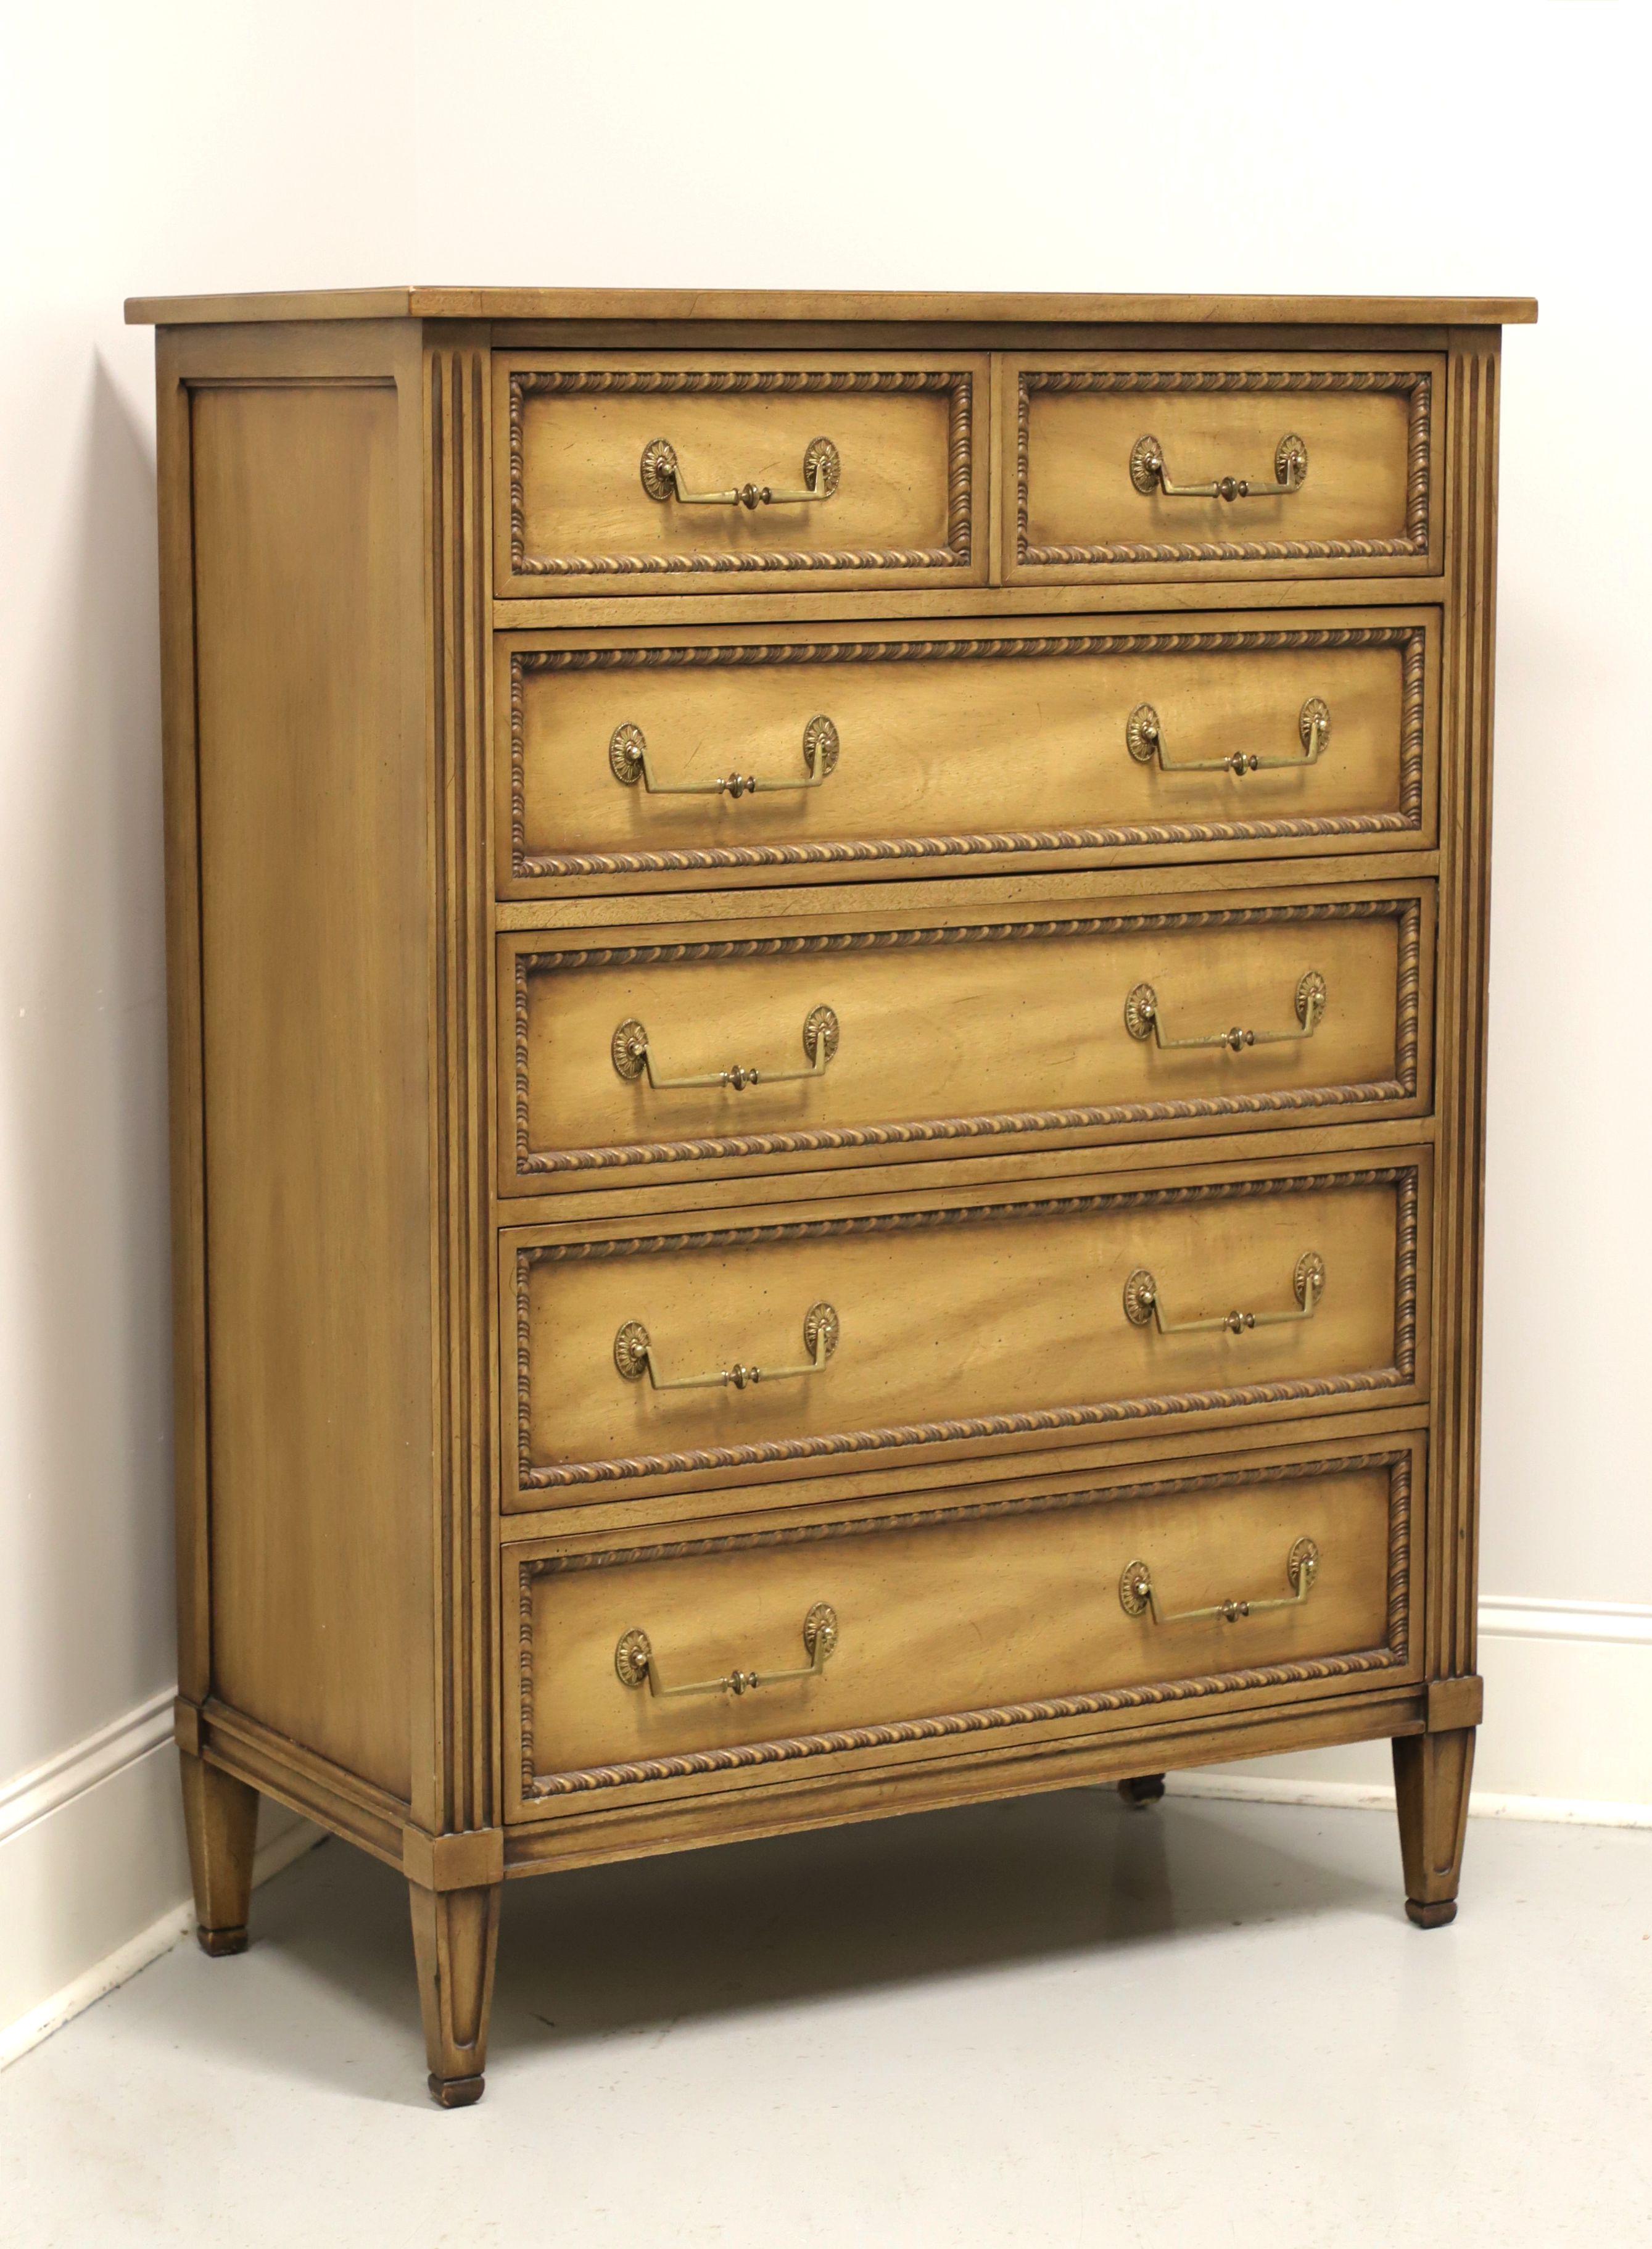 A French Louis XVI style chest of drawers by Henredon. Pecan or similar nutwood, brass hardware, fluted column sides and spade feet. Features five drawers of dovetail construction, top three having removable dividers. Made in Morganton, North